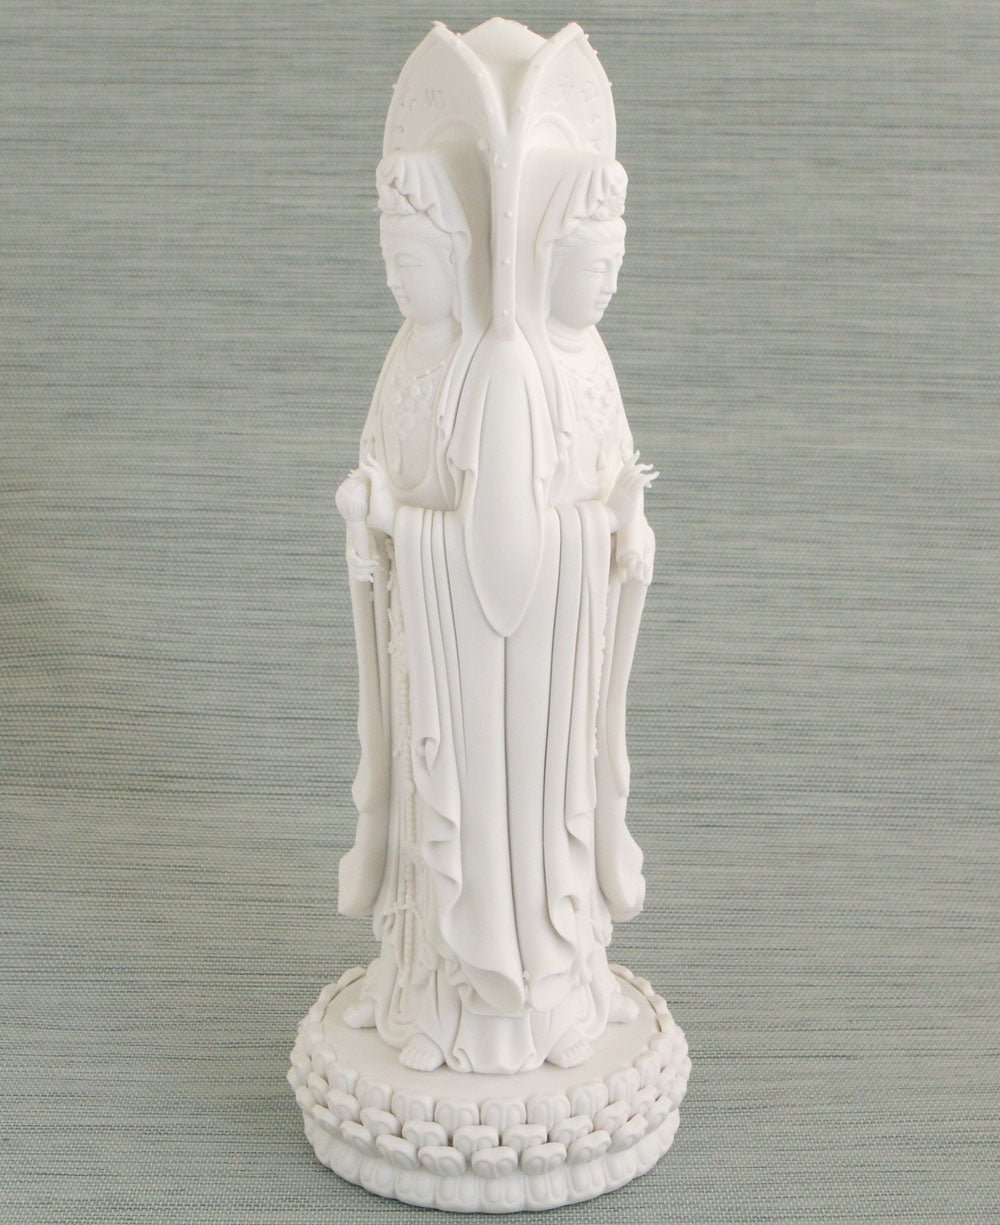 Three-Sided Porcelain Kuan Yin Statue - Sculptures & Statues